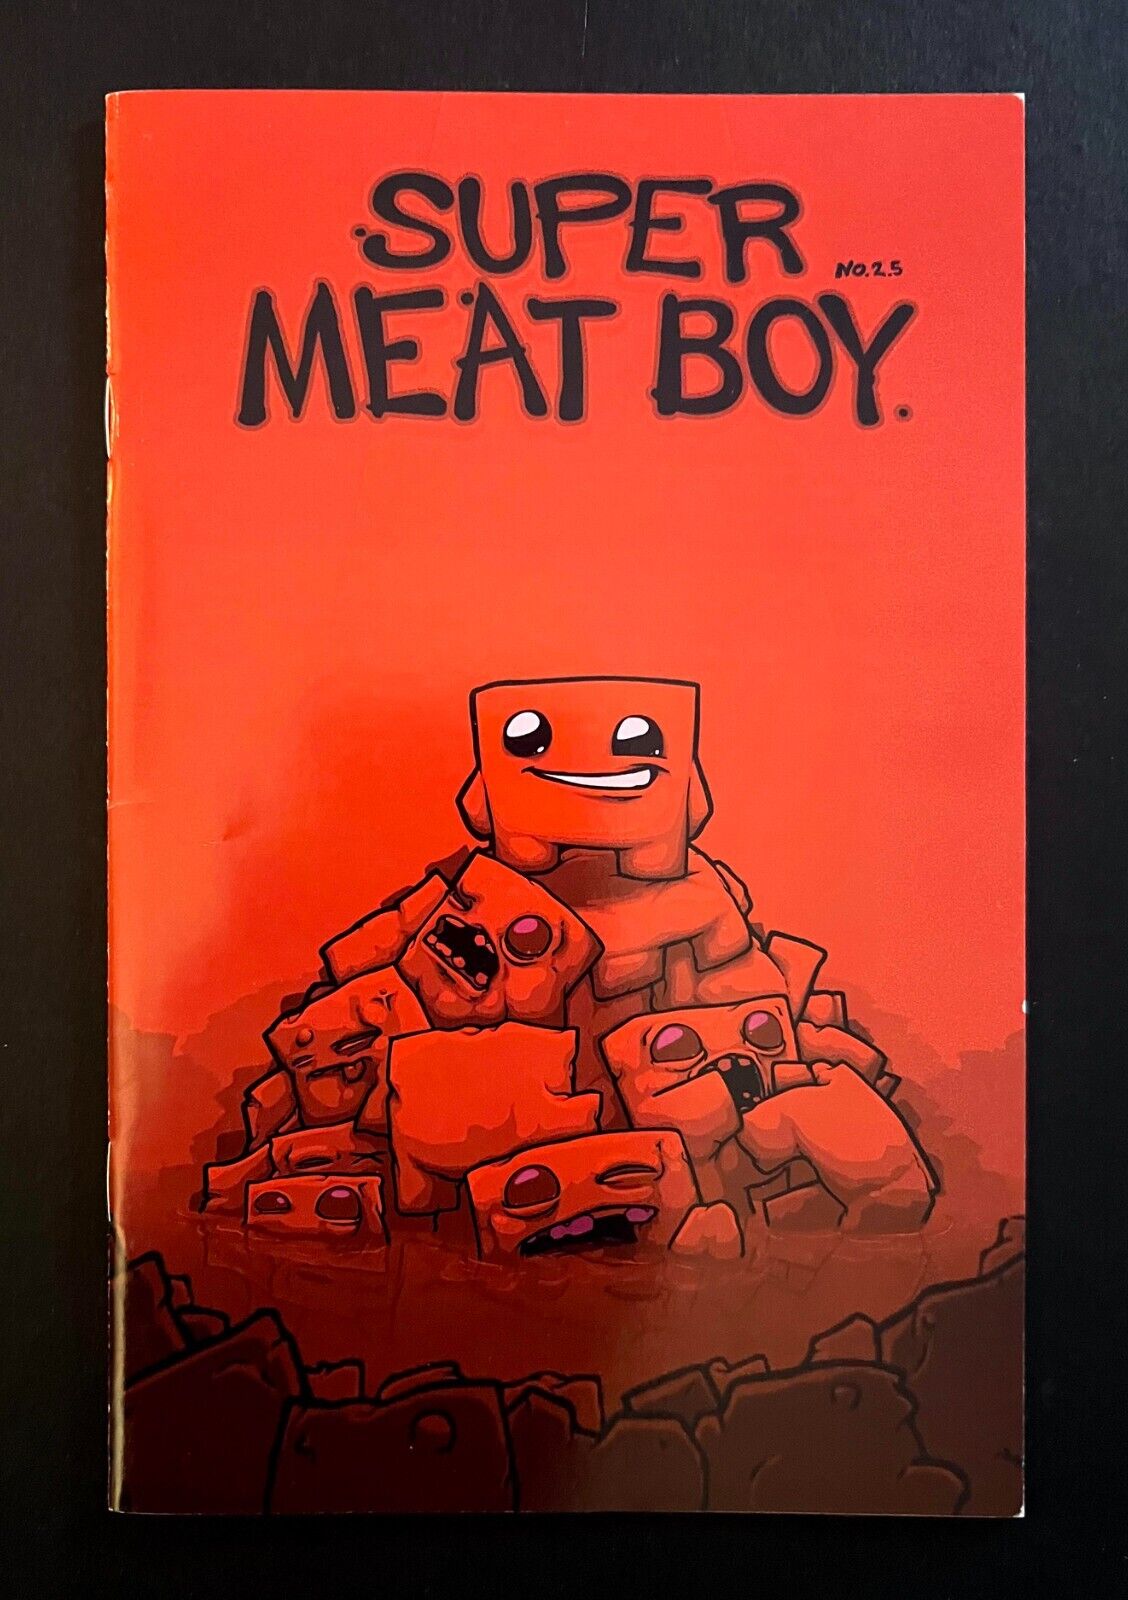 SUPER MEAT BOY #2.5 Rare Comic By Edmund McMillen Tommy Refenes Team Meat 2010